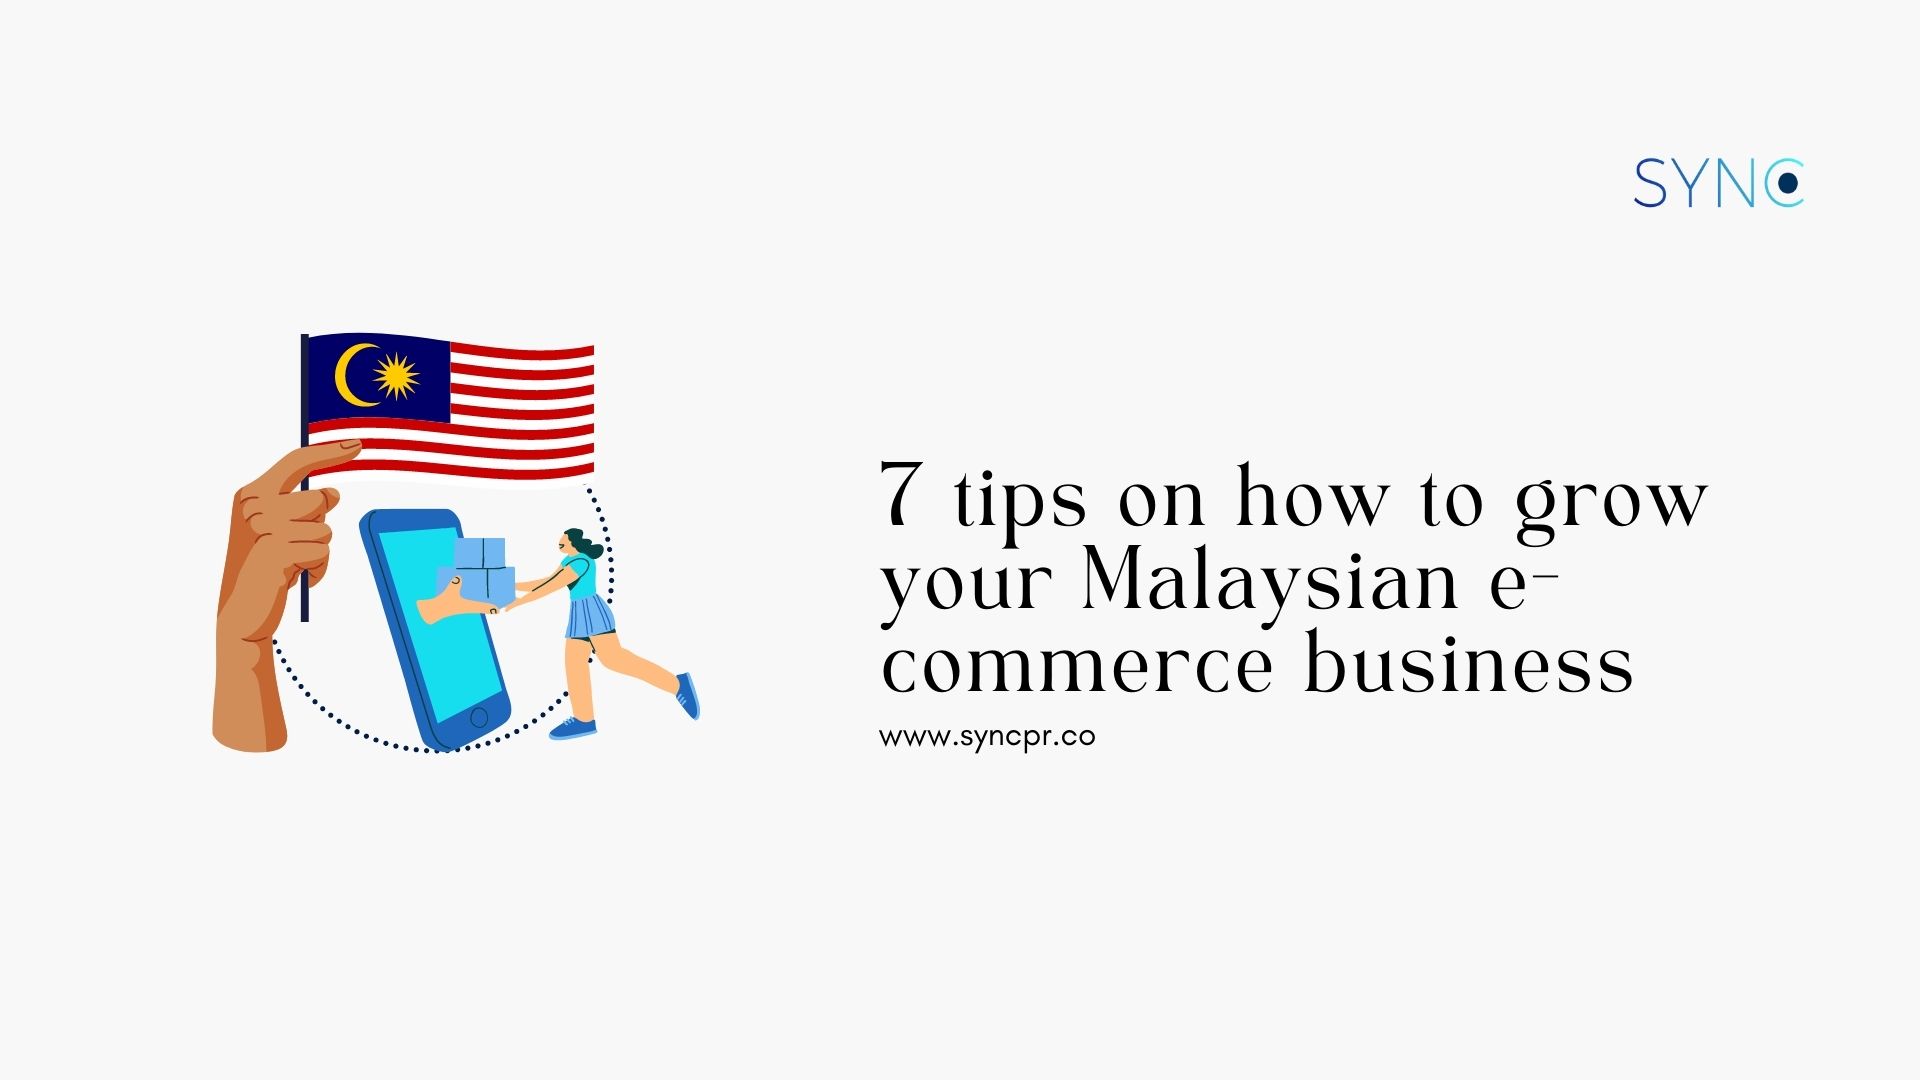 7 tips on how to grow your Malaysian e-commerce business